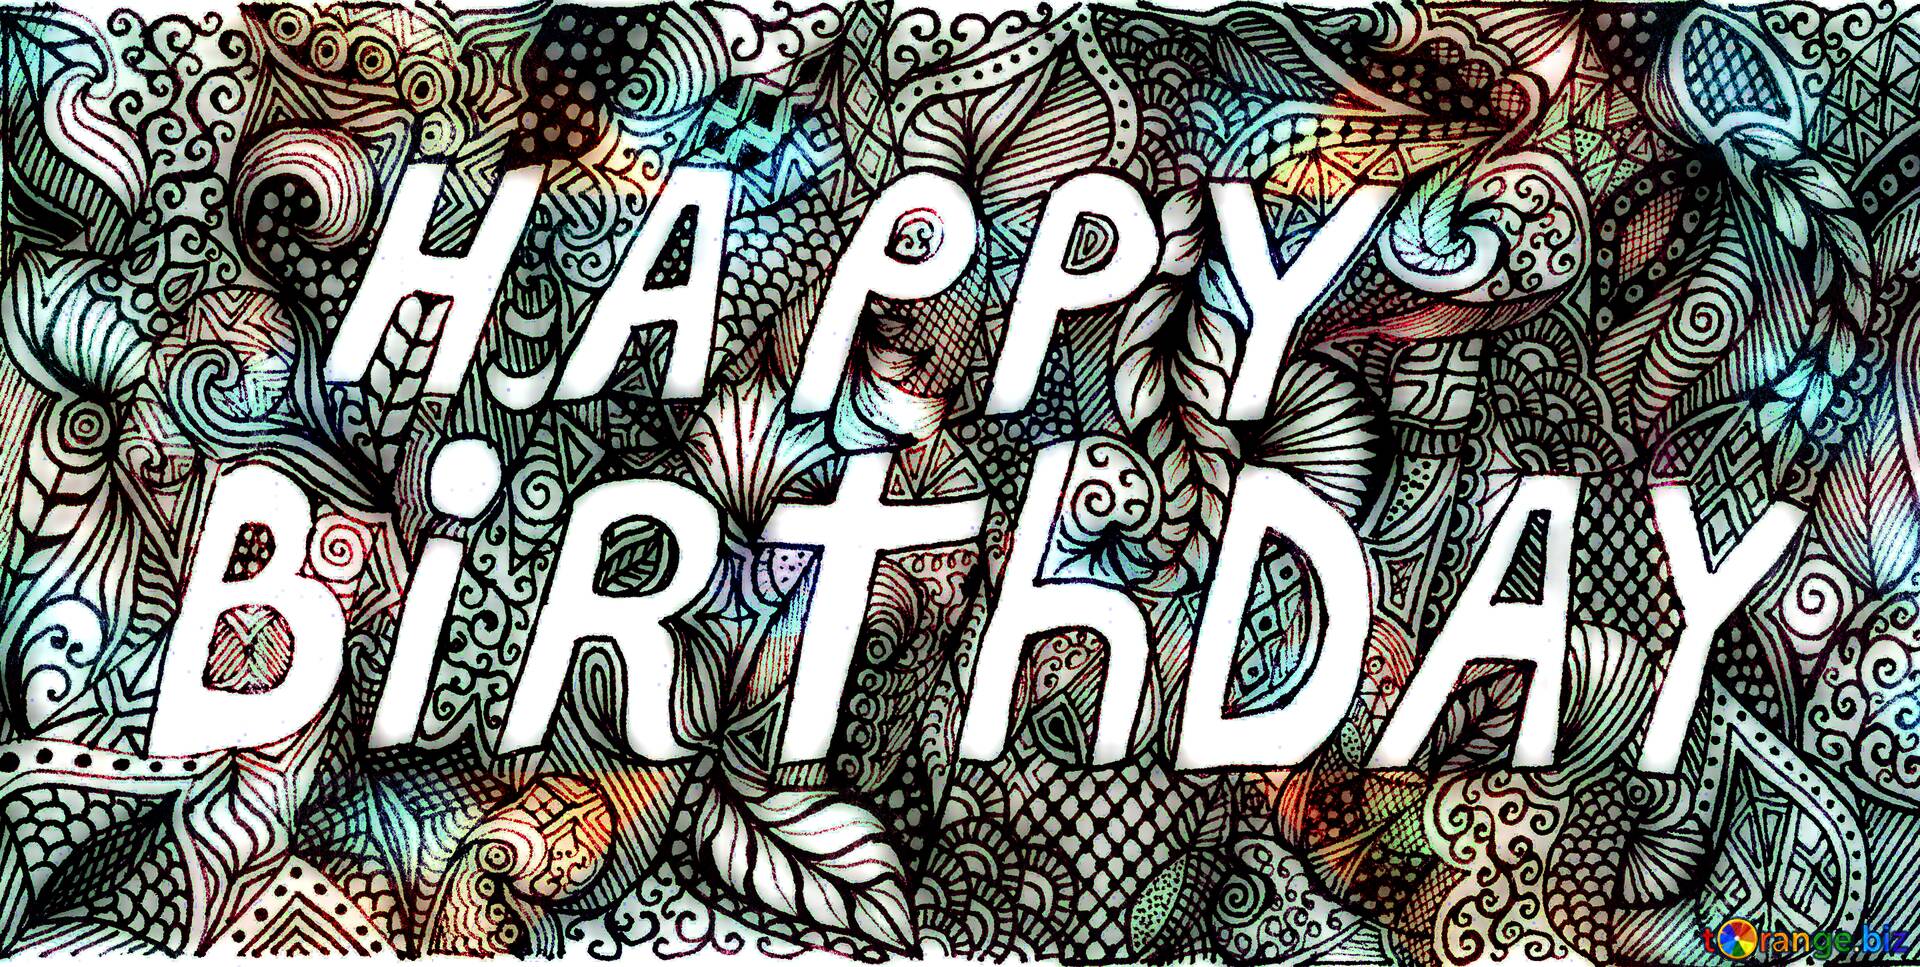 Download free picture Acrylic paint background pattern design funny happy  birthday on CC-BY License ~ Free Image Stock  ~ fx №230902